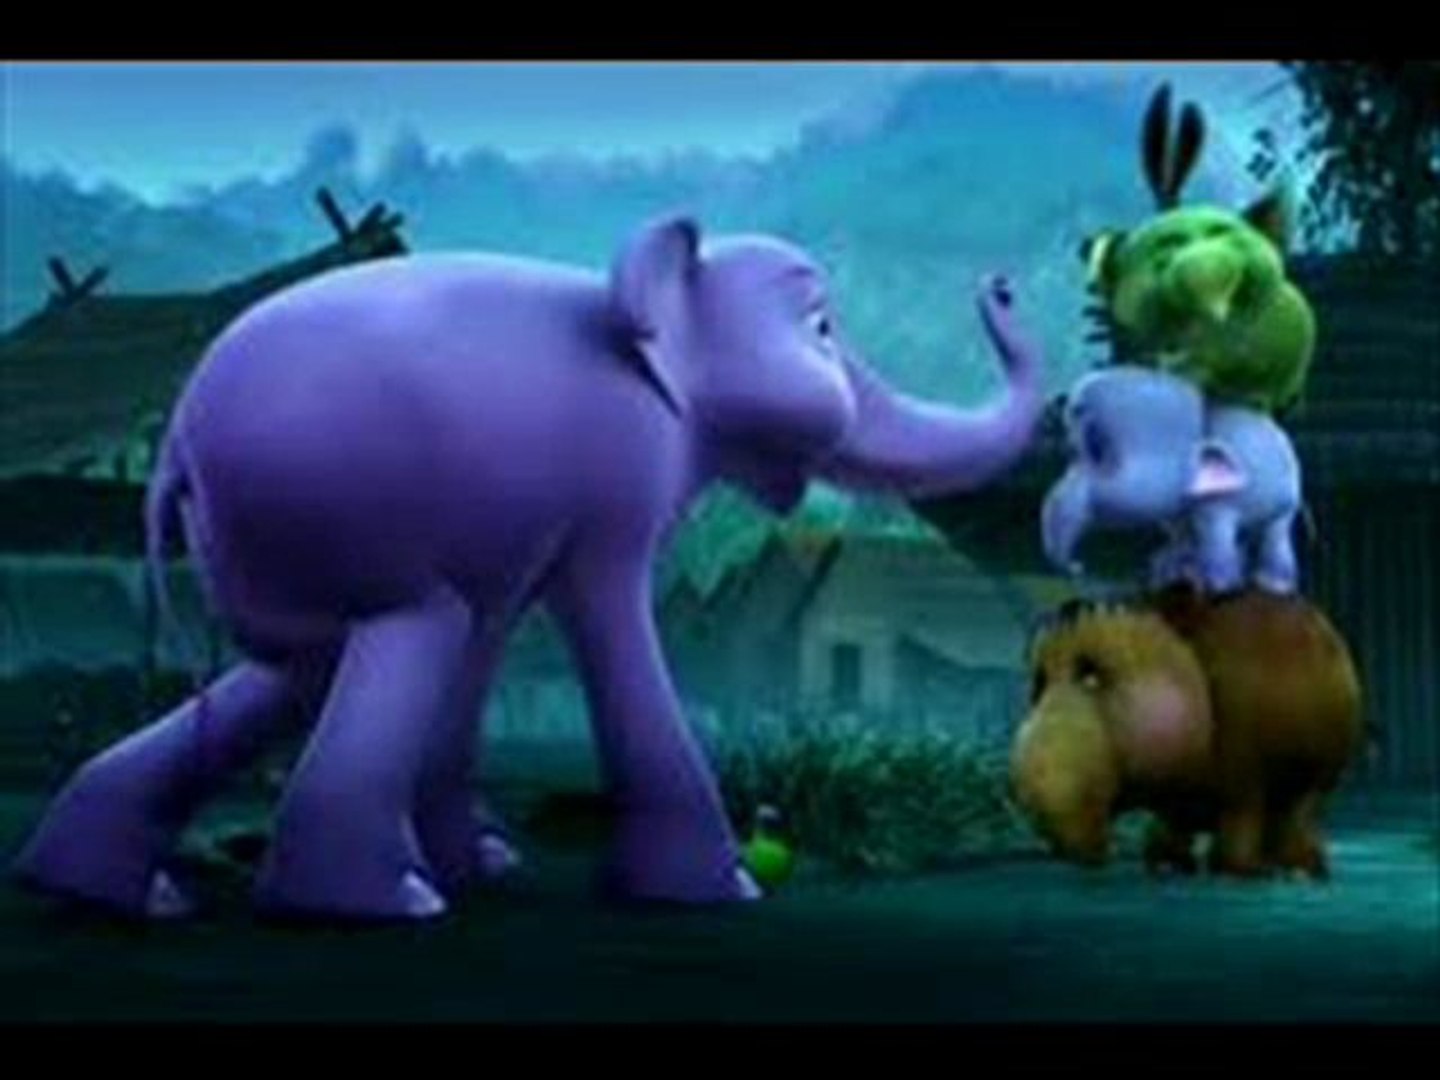 The Elephant King 2 Movie Animated Trailer HD - Dailymotion Video